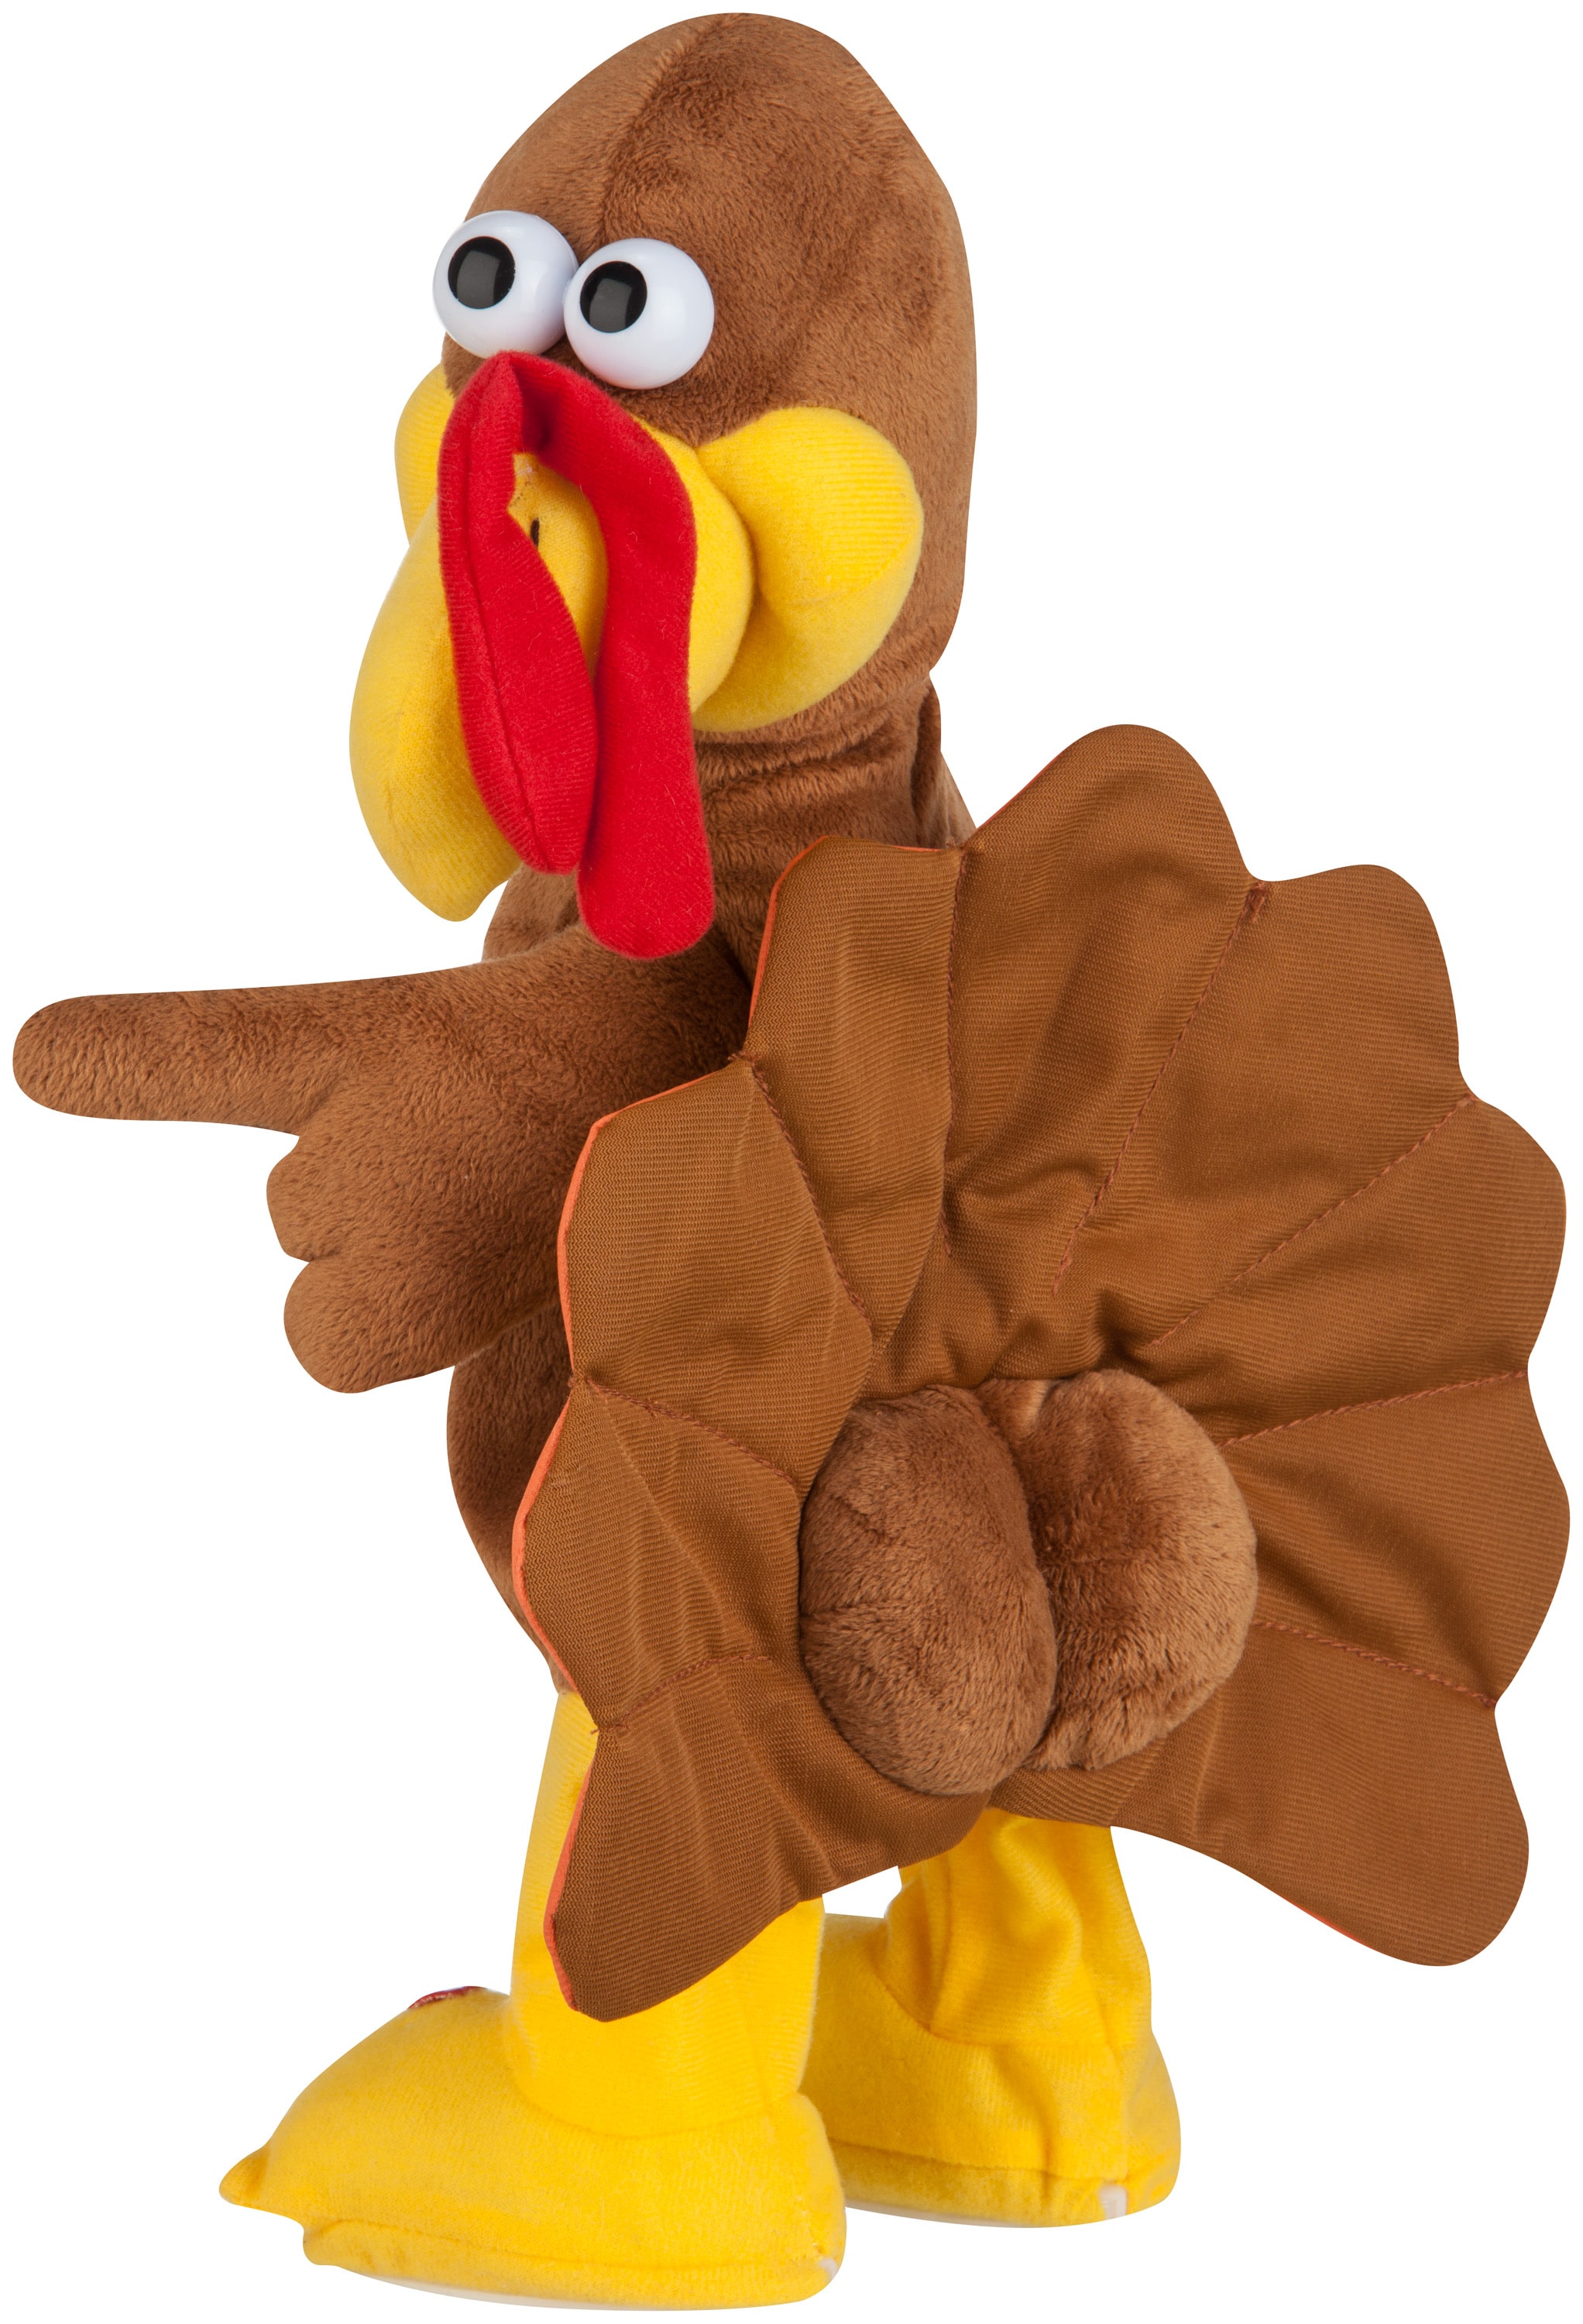 Gemmy 14.96-in Musical Animatronic Turkey Tabletop Decoration at Lowes.com